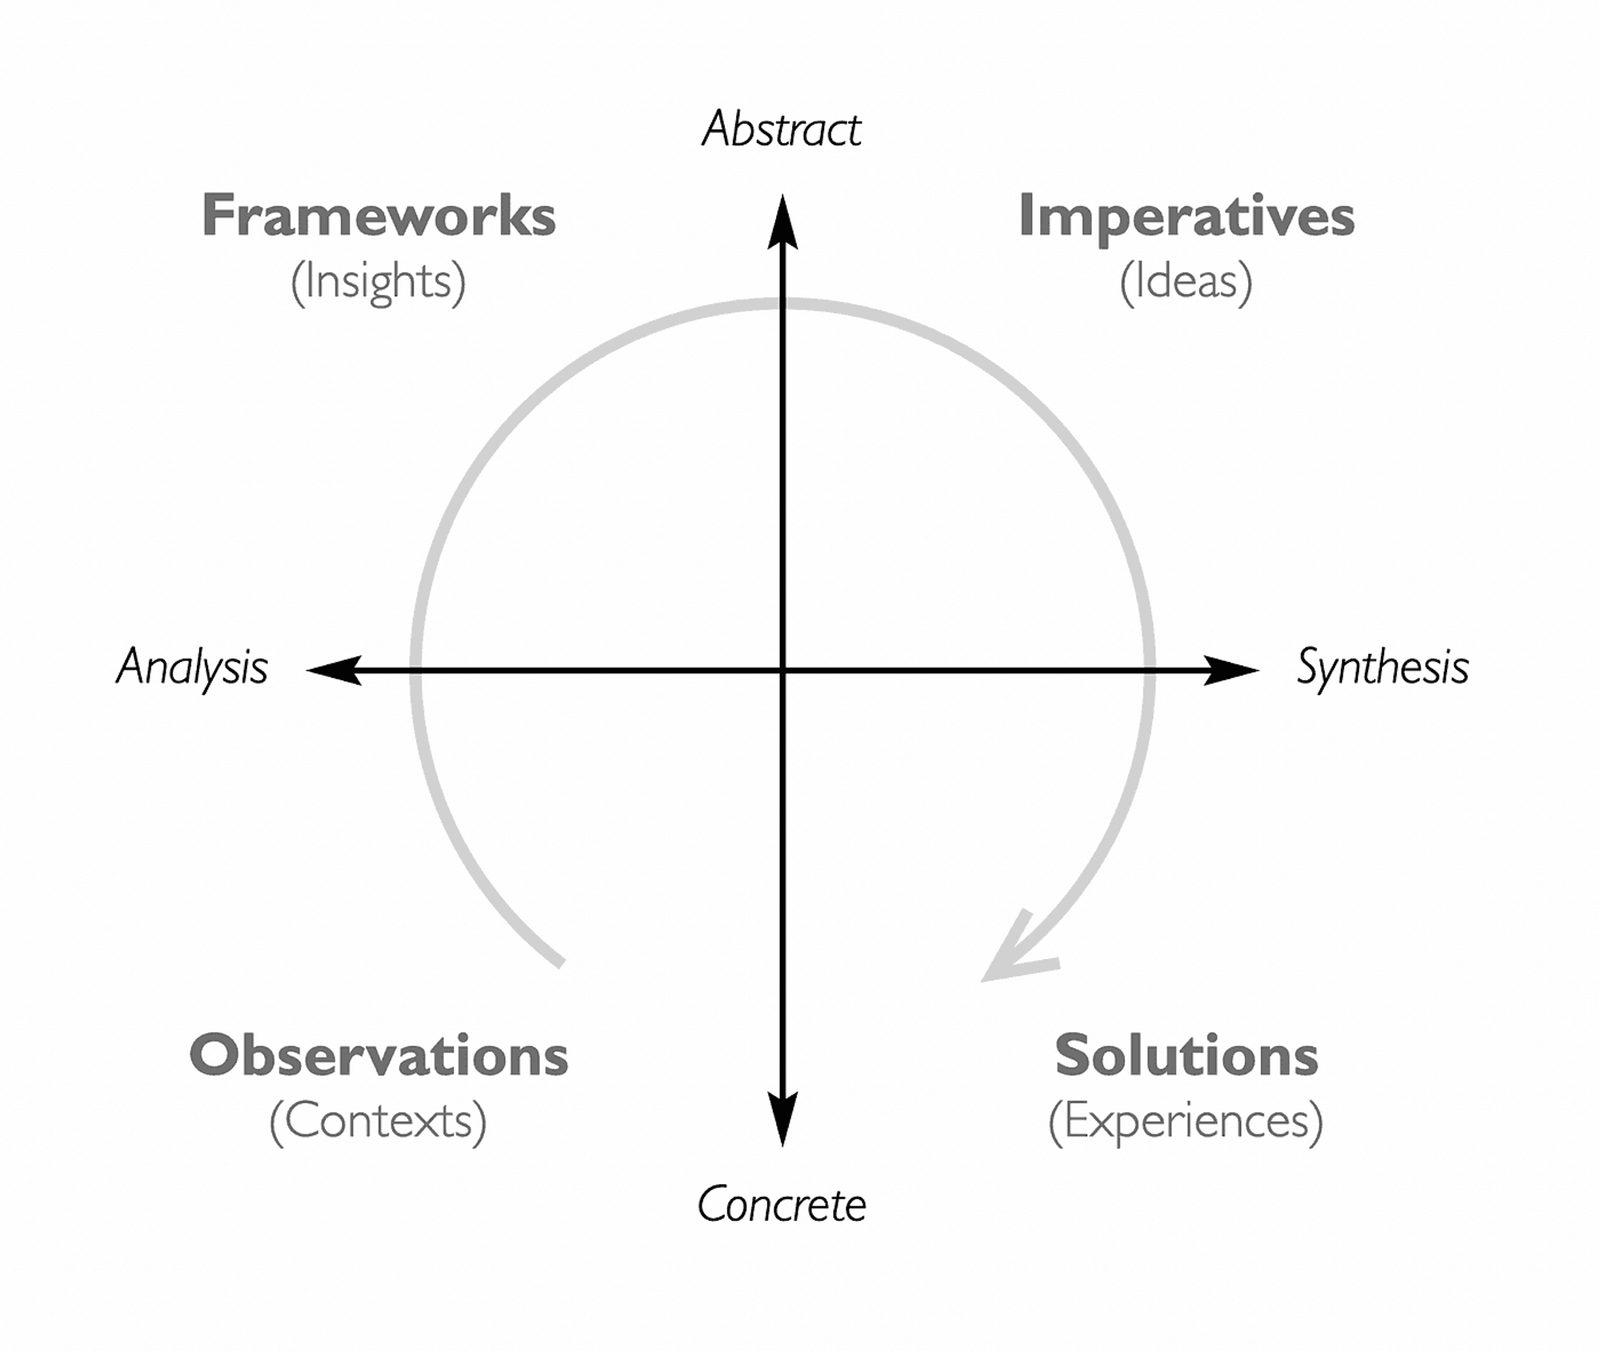 The Innovation Process (Source: Sara L. Beckman, Michael Barry, “Innovation as a Learning Process”, CALIFORNIA MANAGEMENT REVIEW, VOL. 50, NO. 1, FALL 2007) 